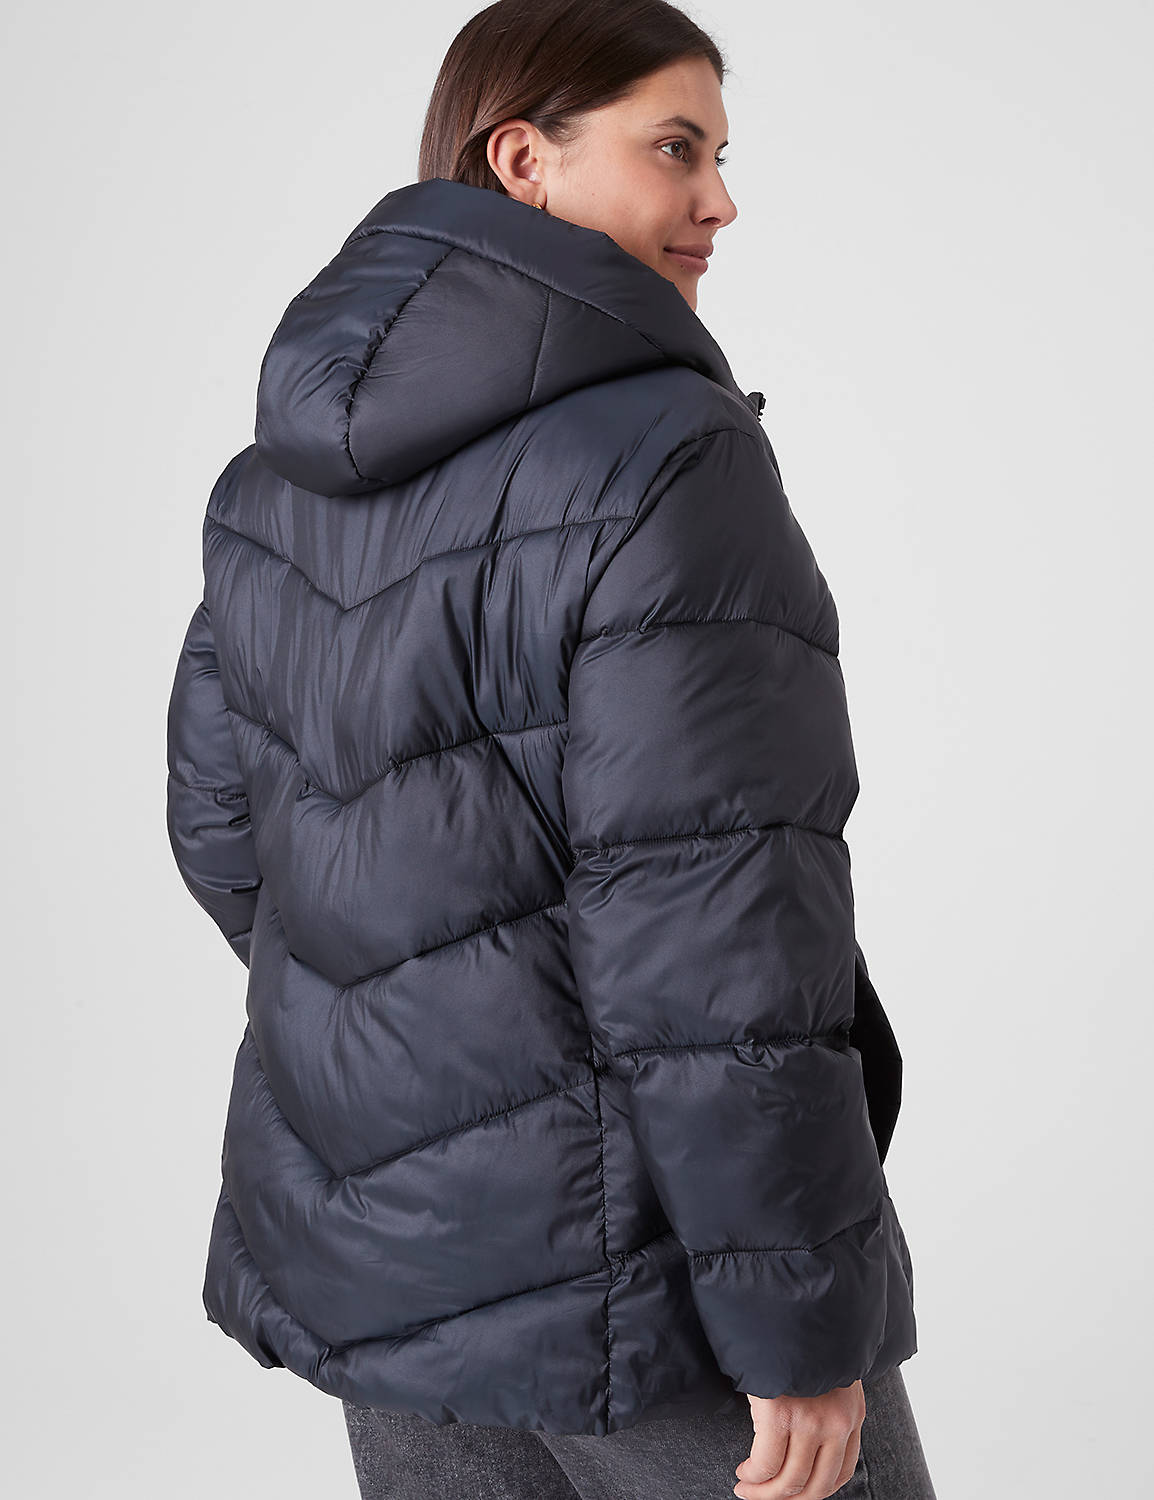 REGULAR LENGTH PUFFER with Hood 113 Product Image 2